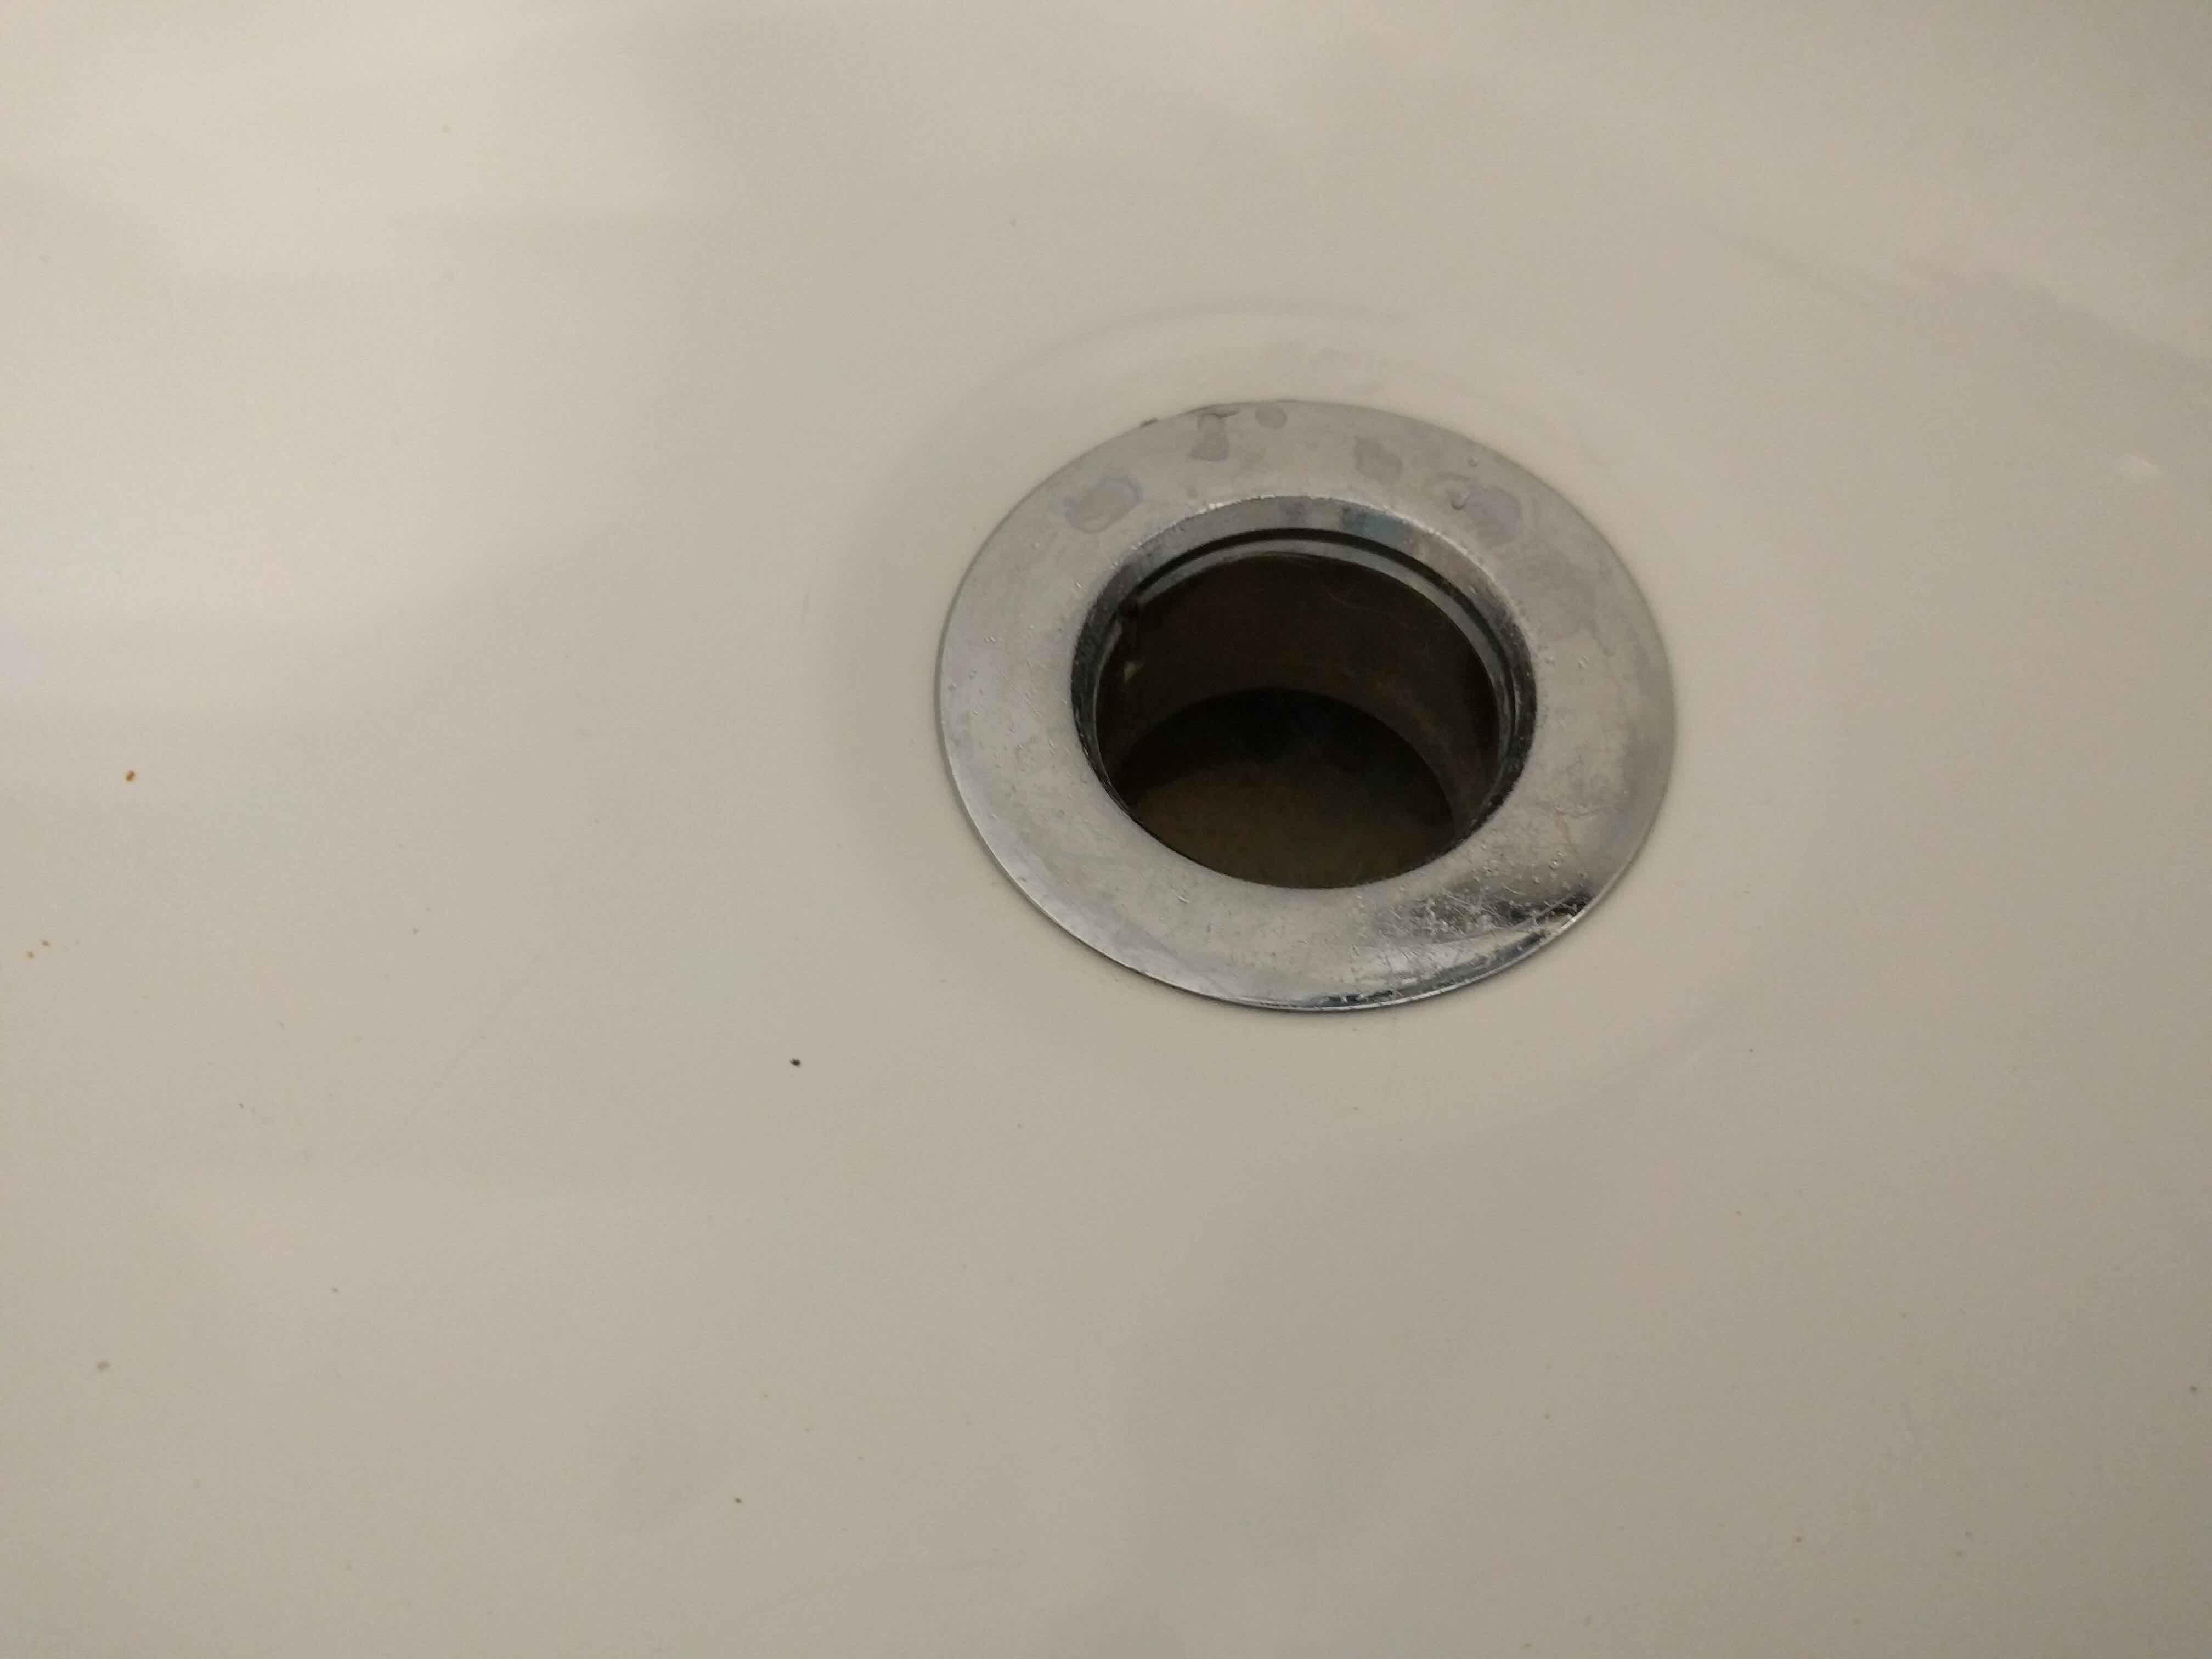 How To Change Out Bathtub Drain